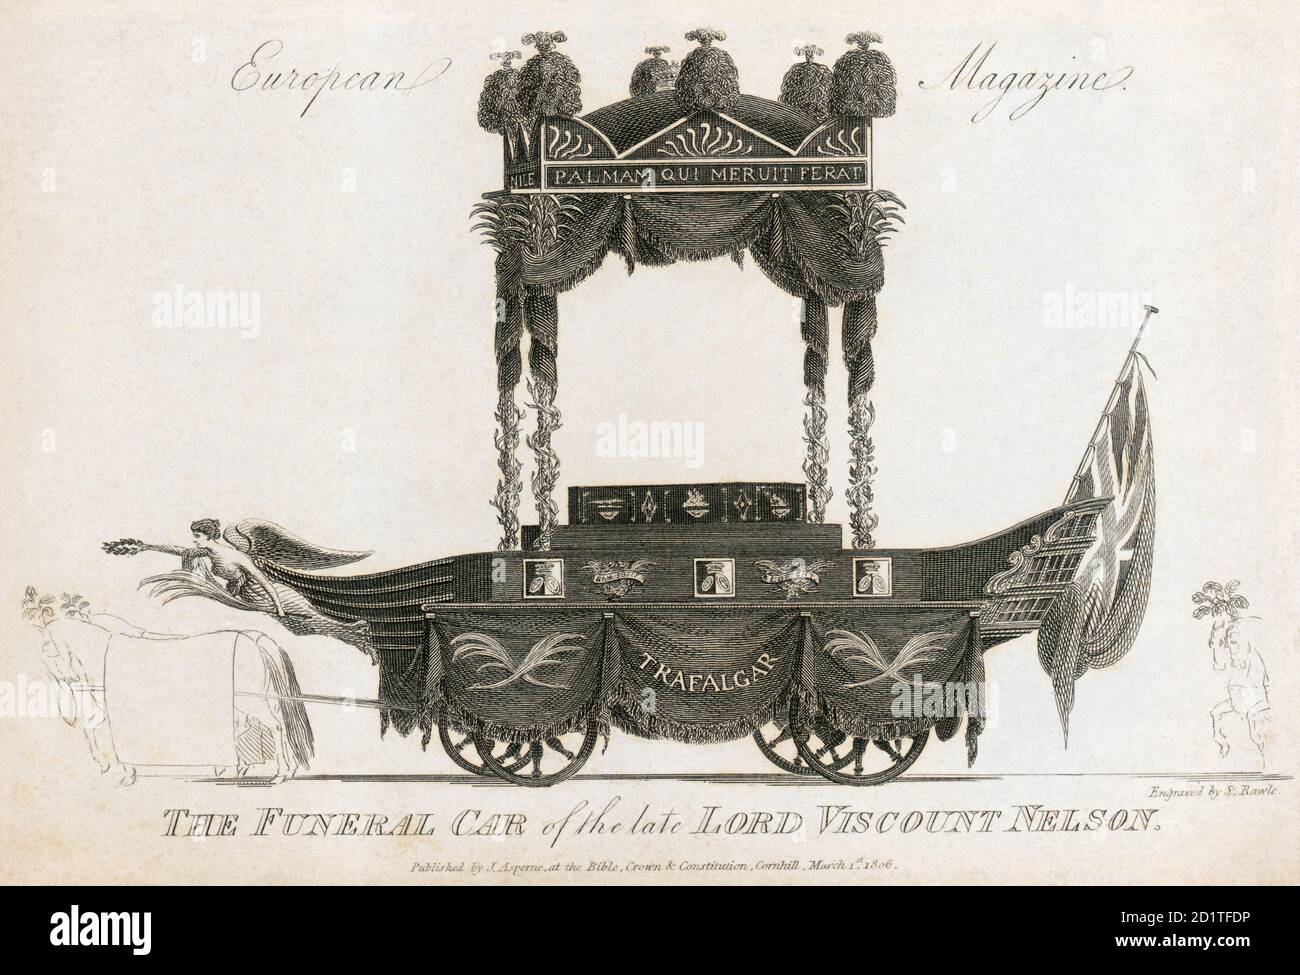 ST PAUL'S CATHEDRAL, St Paul's Churchyard, City of London. Funeral car for Admiral Nelson. Engraving dated 1806. From the Mayson Beeton Collection. Stock Photo